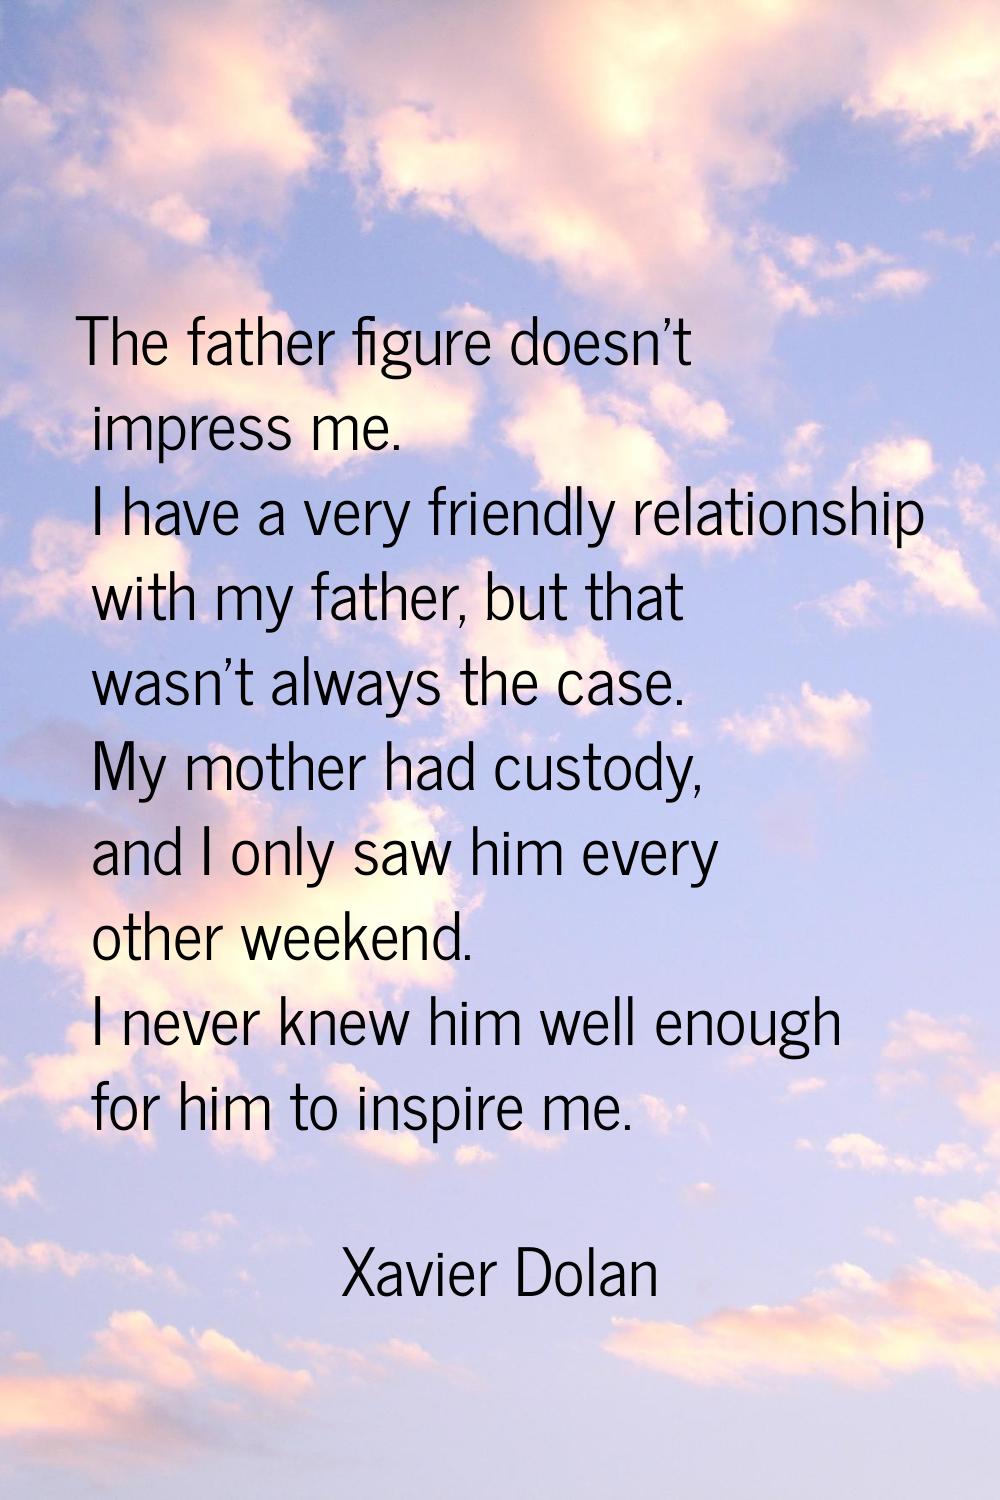 The father figure doesn't impress me. I have a very friendly relationship with my father, but that 